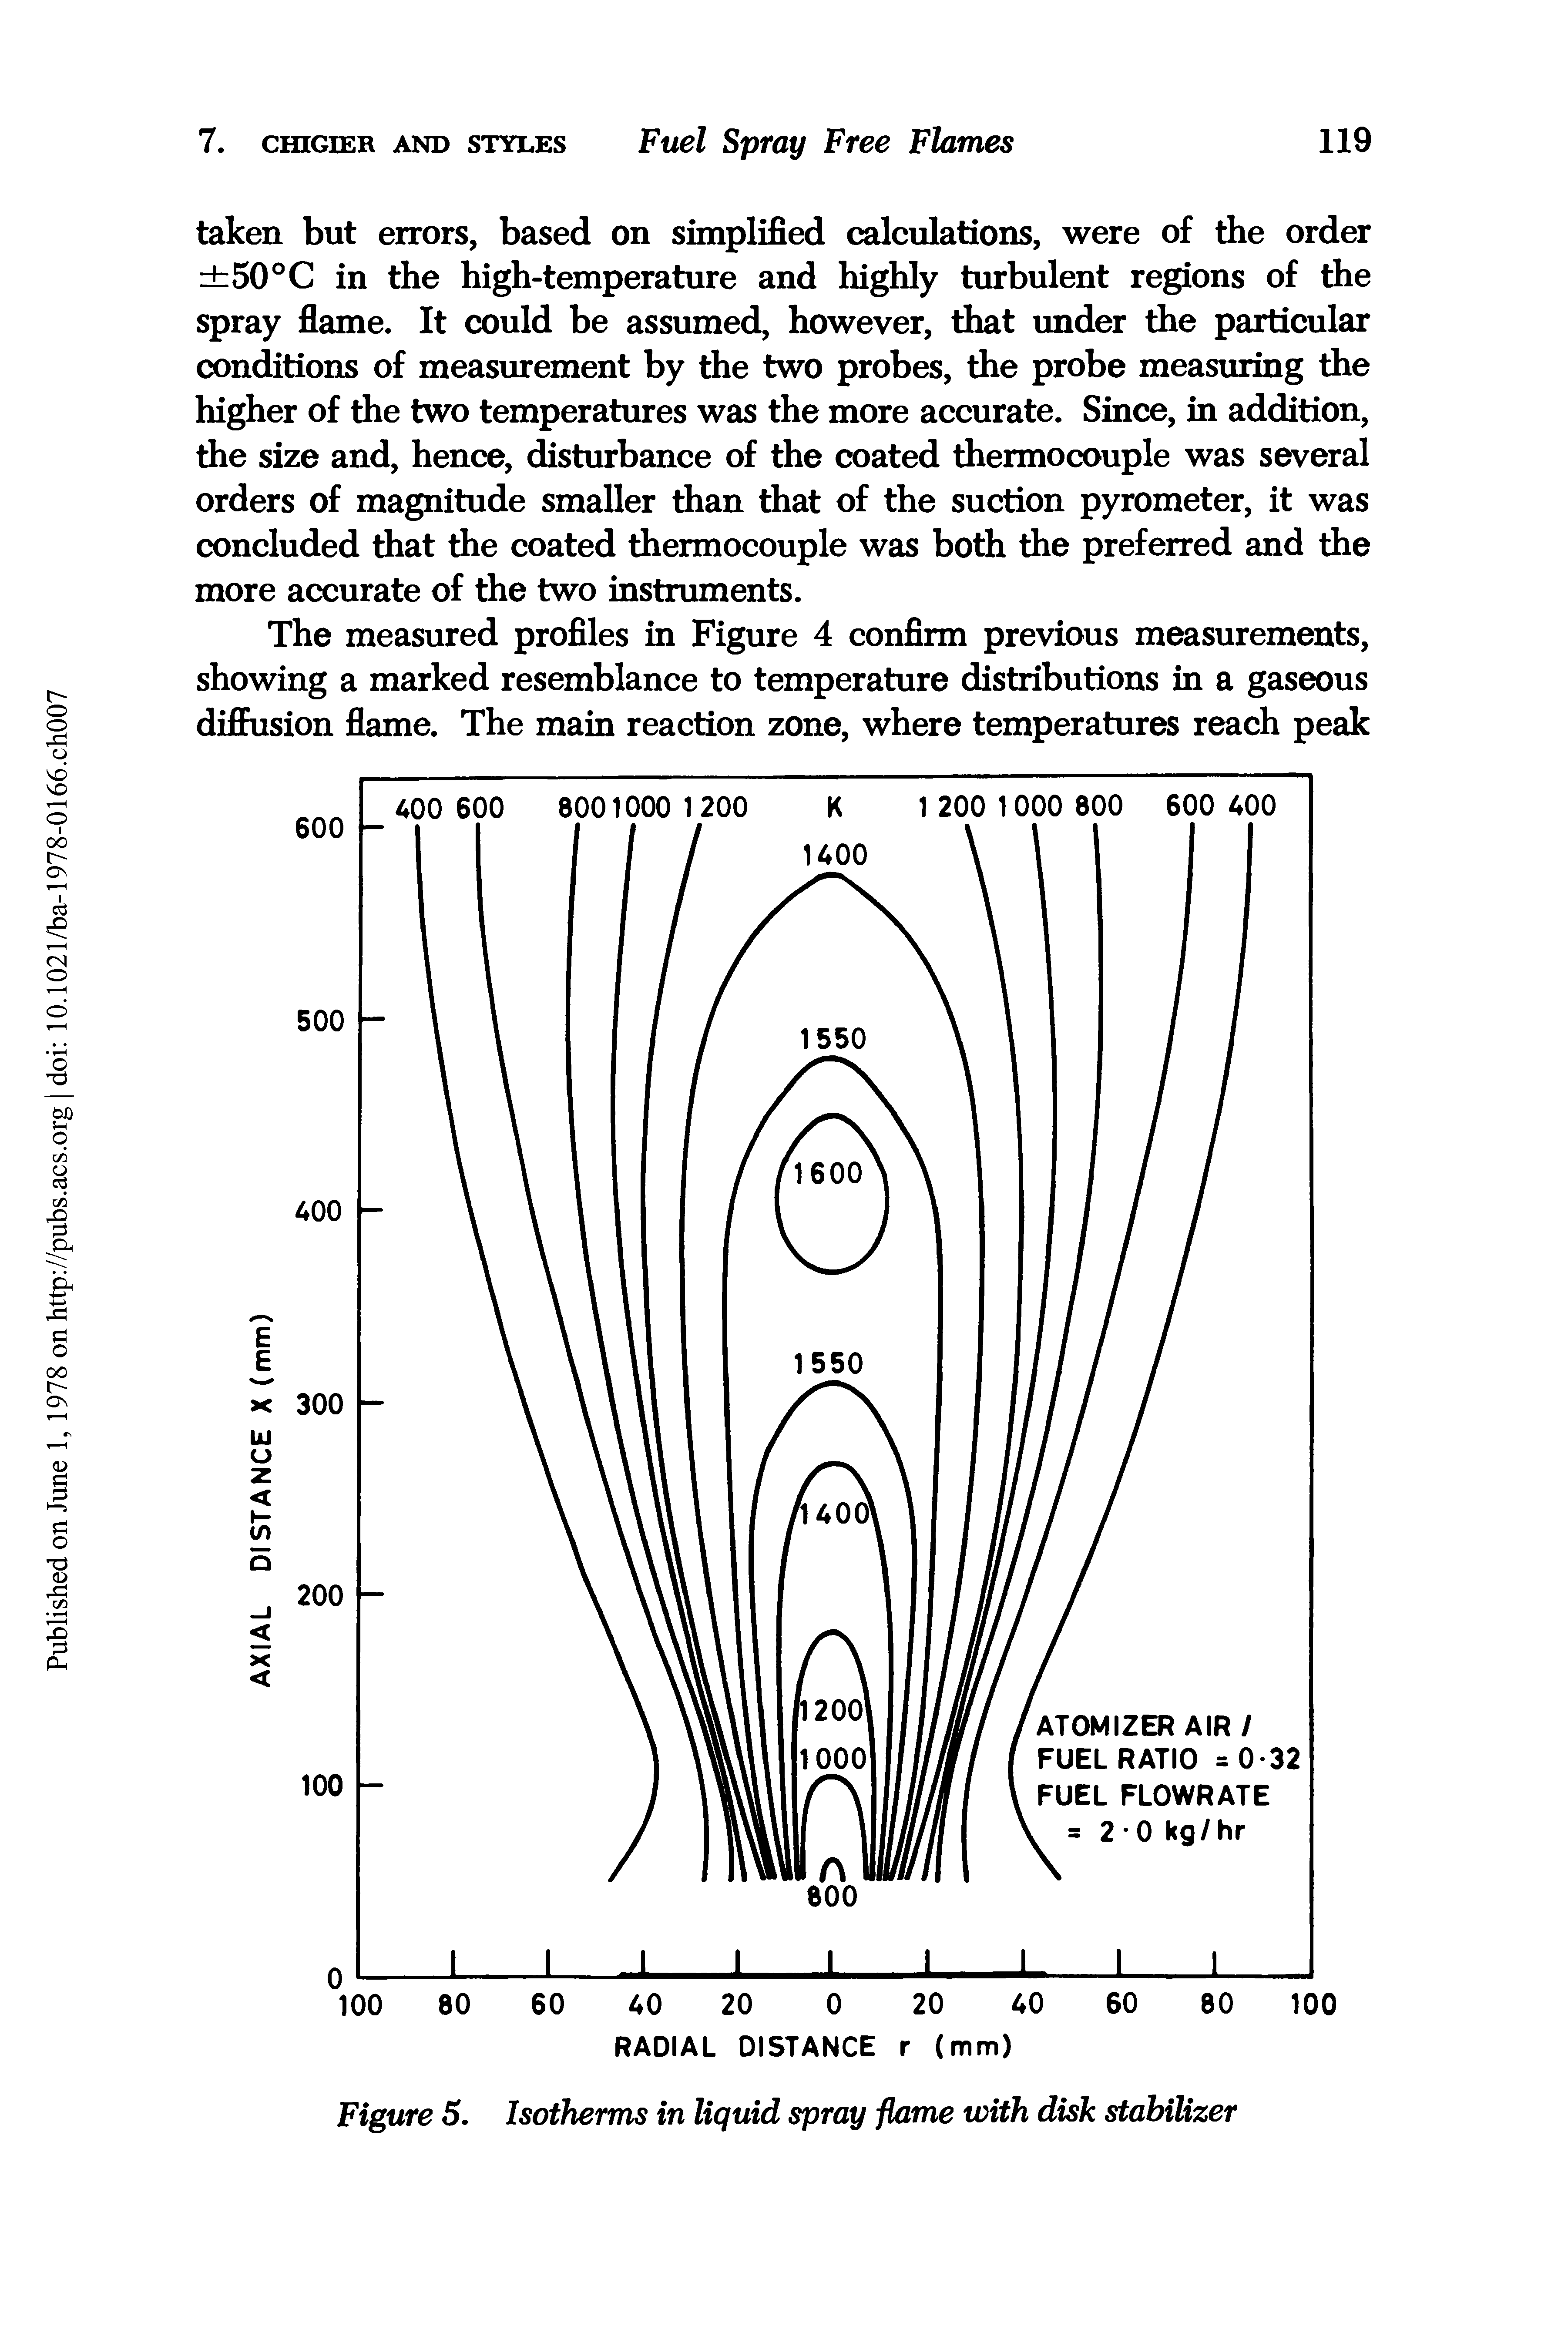 Figure 5. Isotherms in liquid spray flame with disk stabilizer...